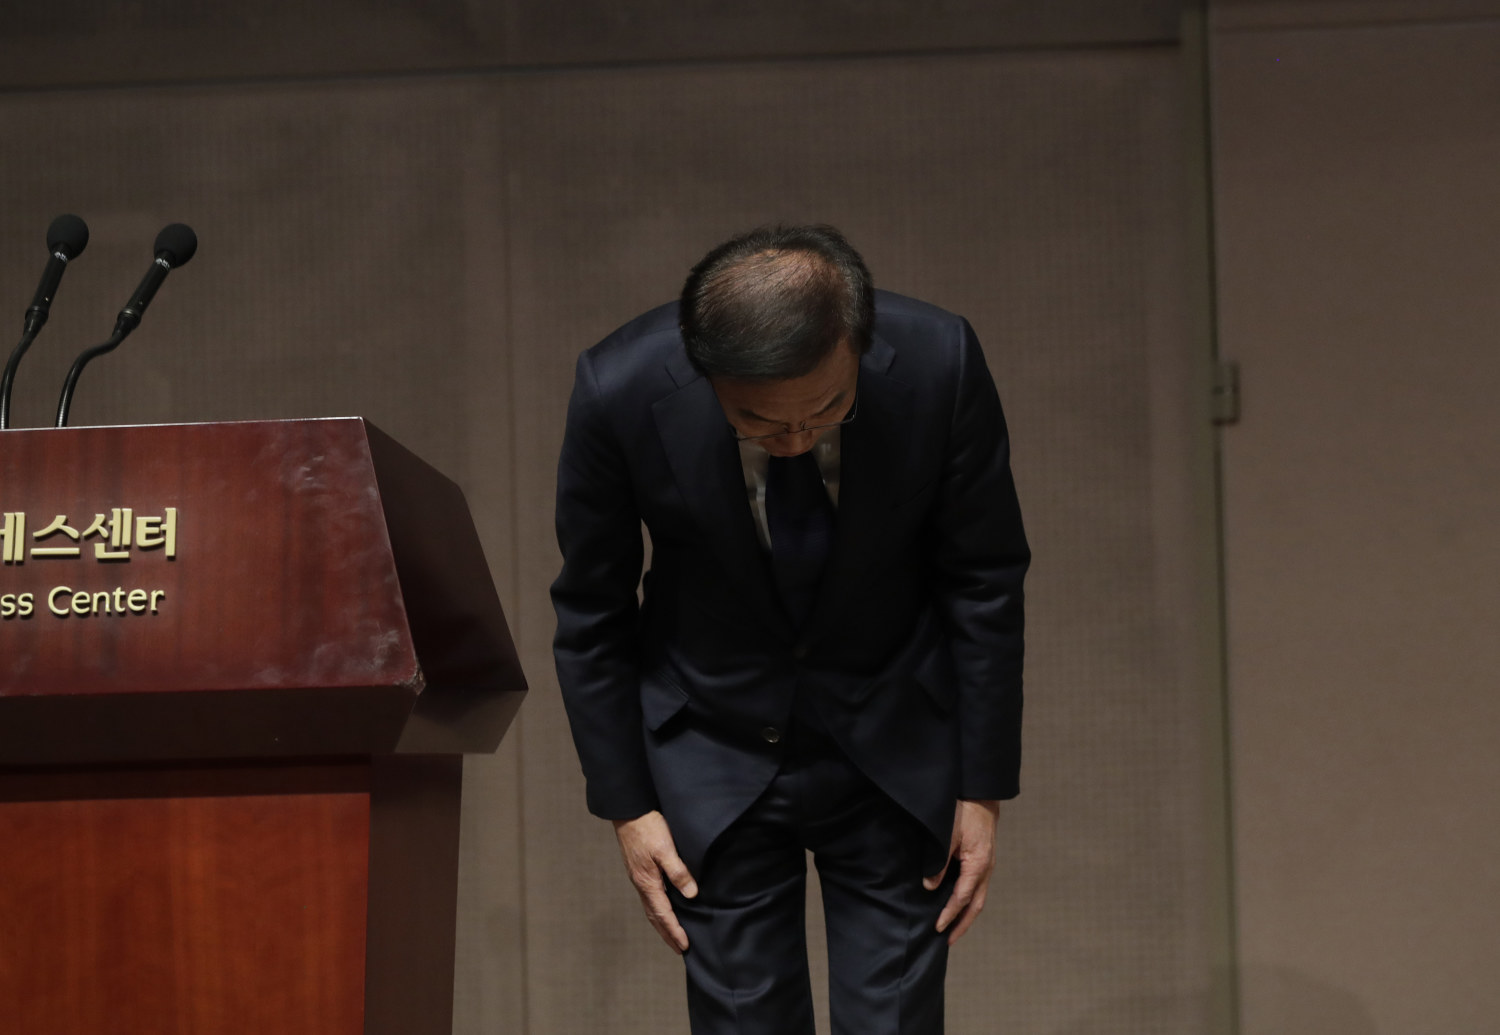 Kinam Kim, President & CEO, Device Solutions, Samsung Electronics bows in apology in Seoul, South Korea, Friday, Nov. 23, 2018. Samsung Electronics has apologized for the sickness and deaths of some of its workers, saying it failed to create a safe working environment at its computer chip and display factories. (AP Photo/Lee Jin-man)